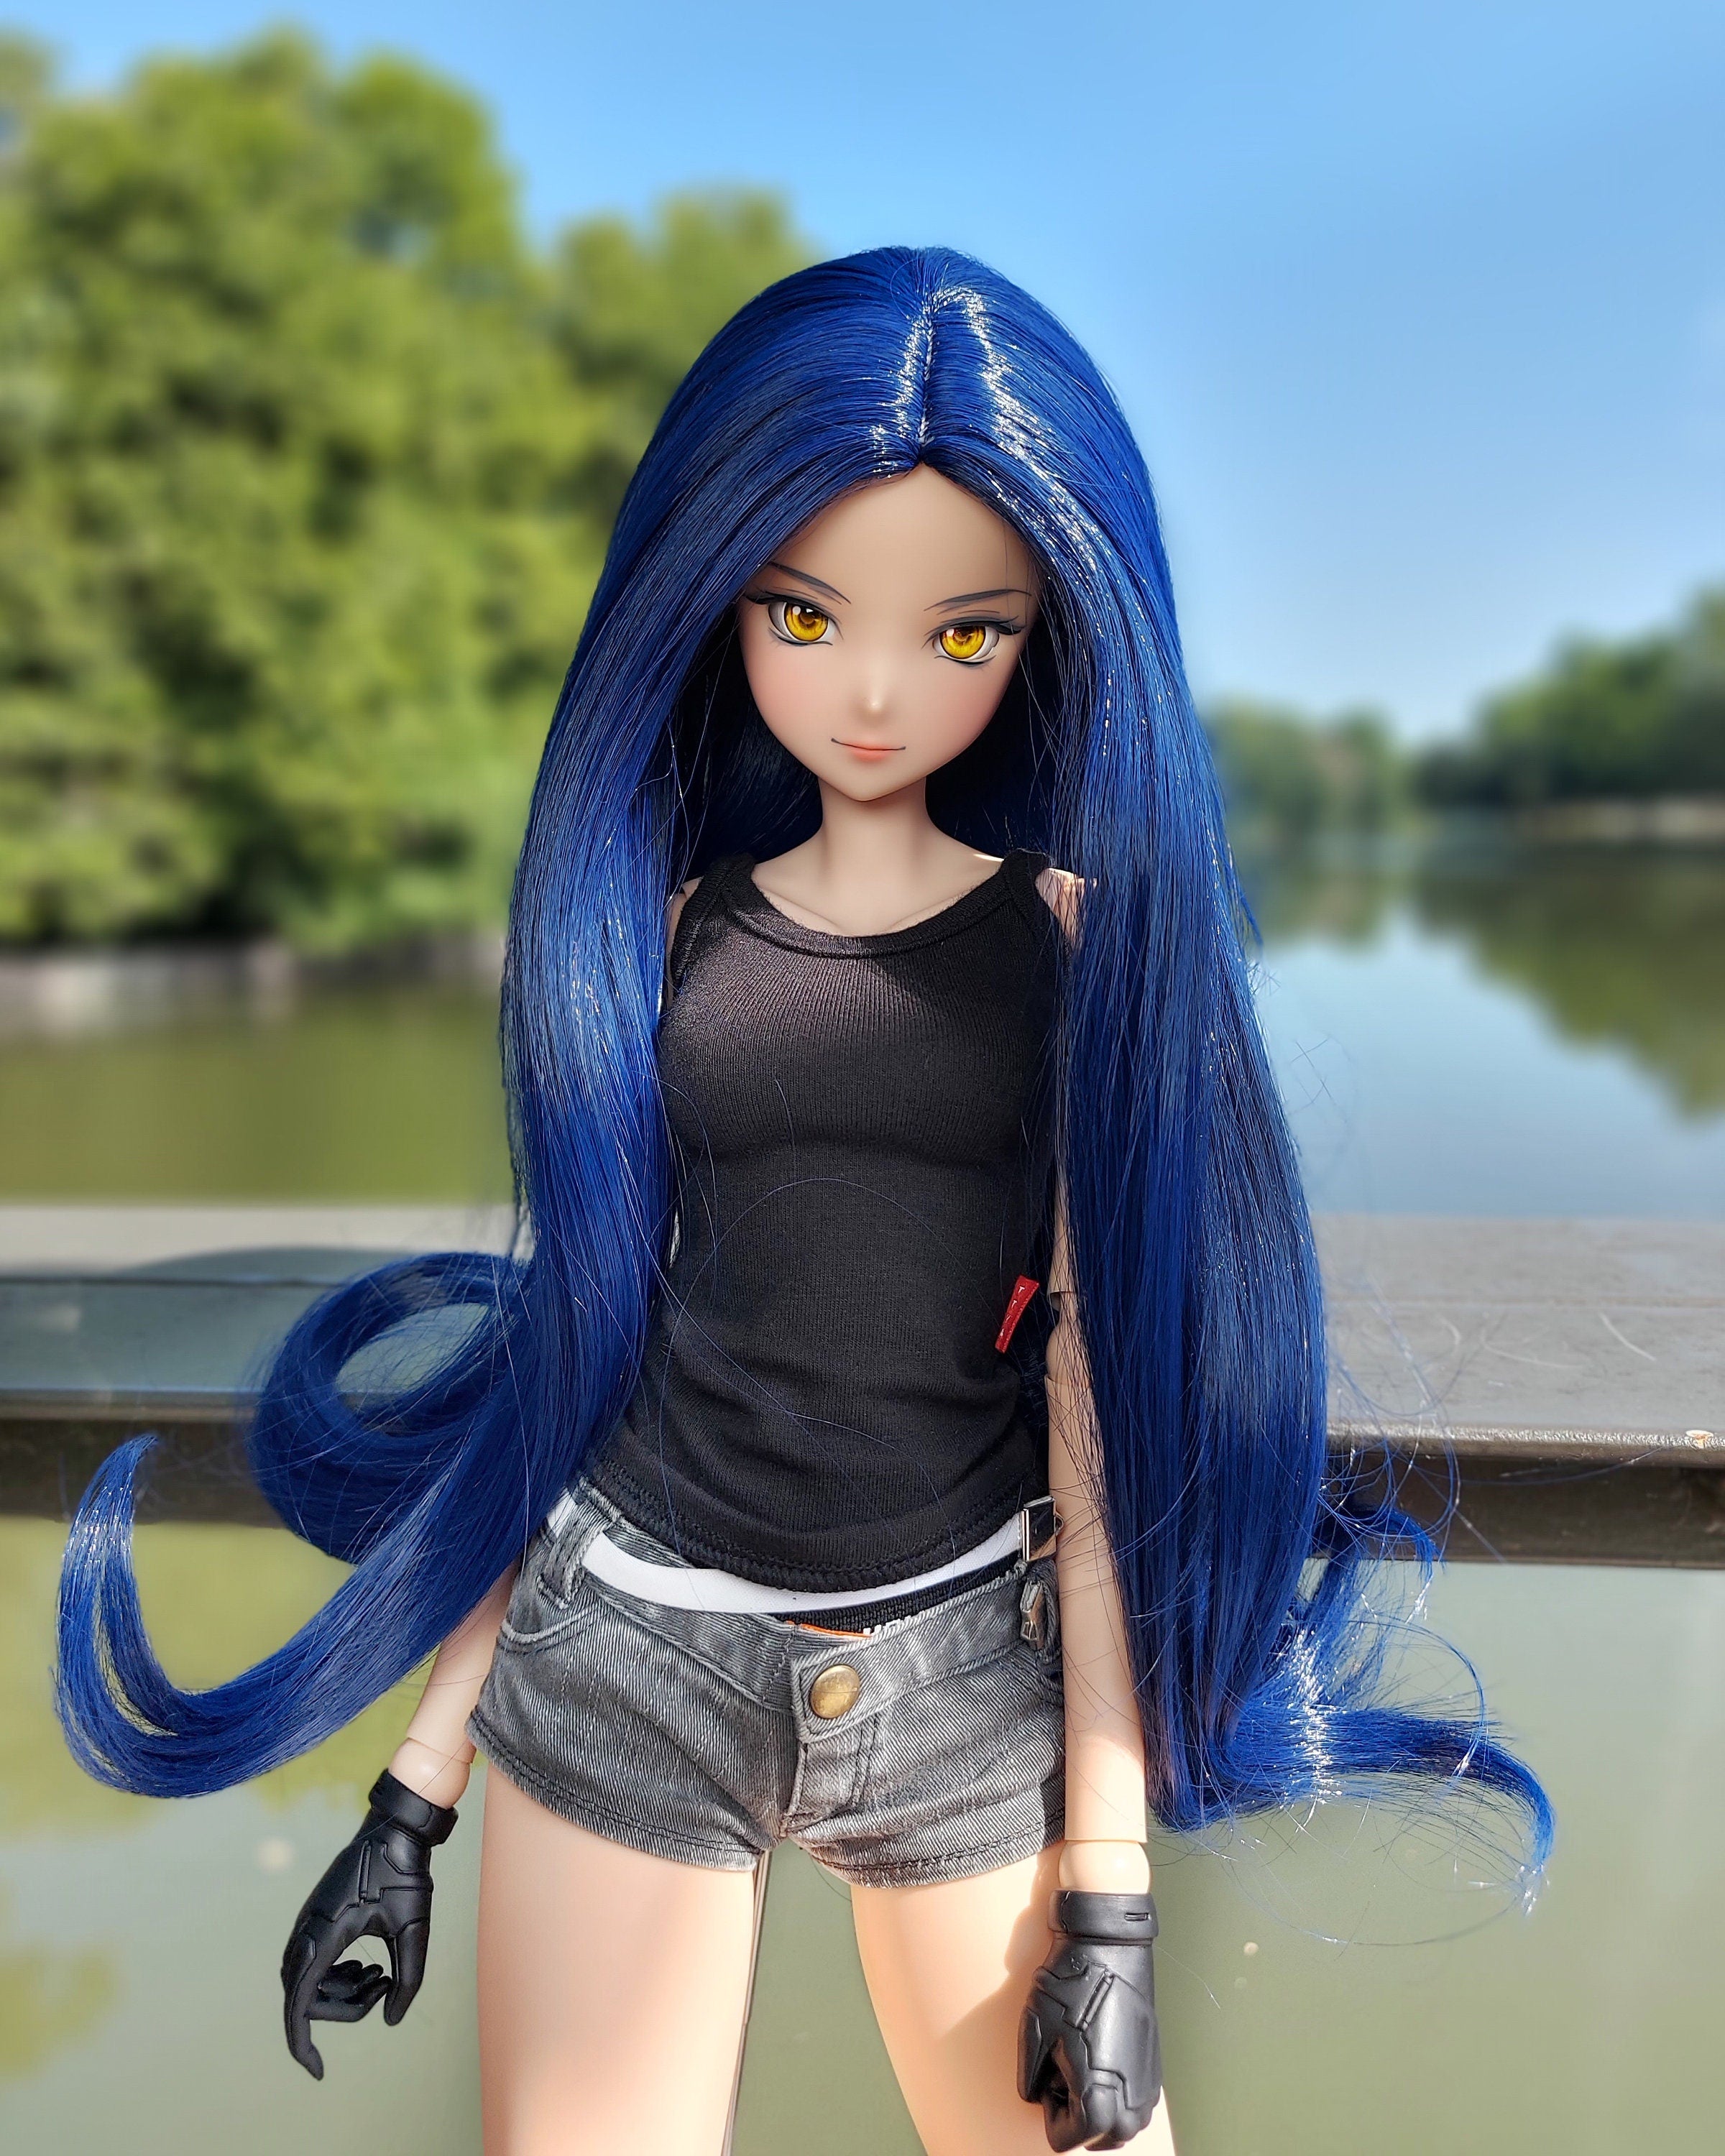 Beautiful Blue Haired Barbie Doll.